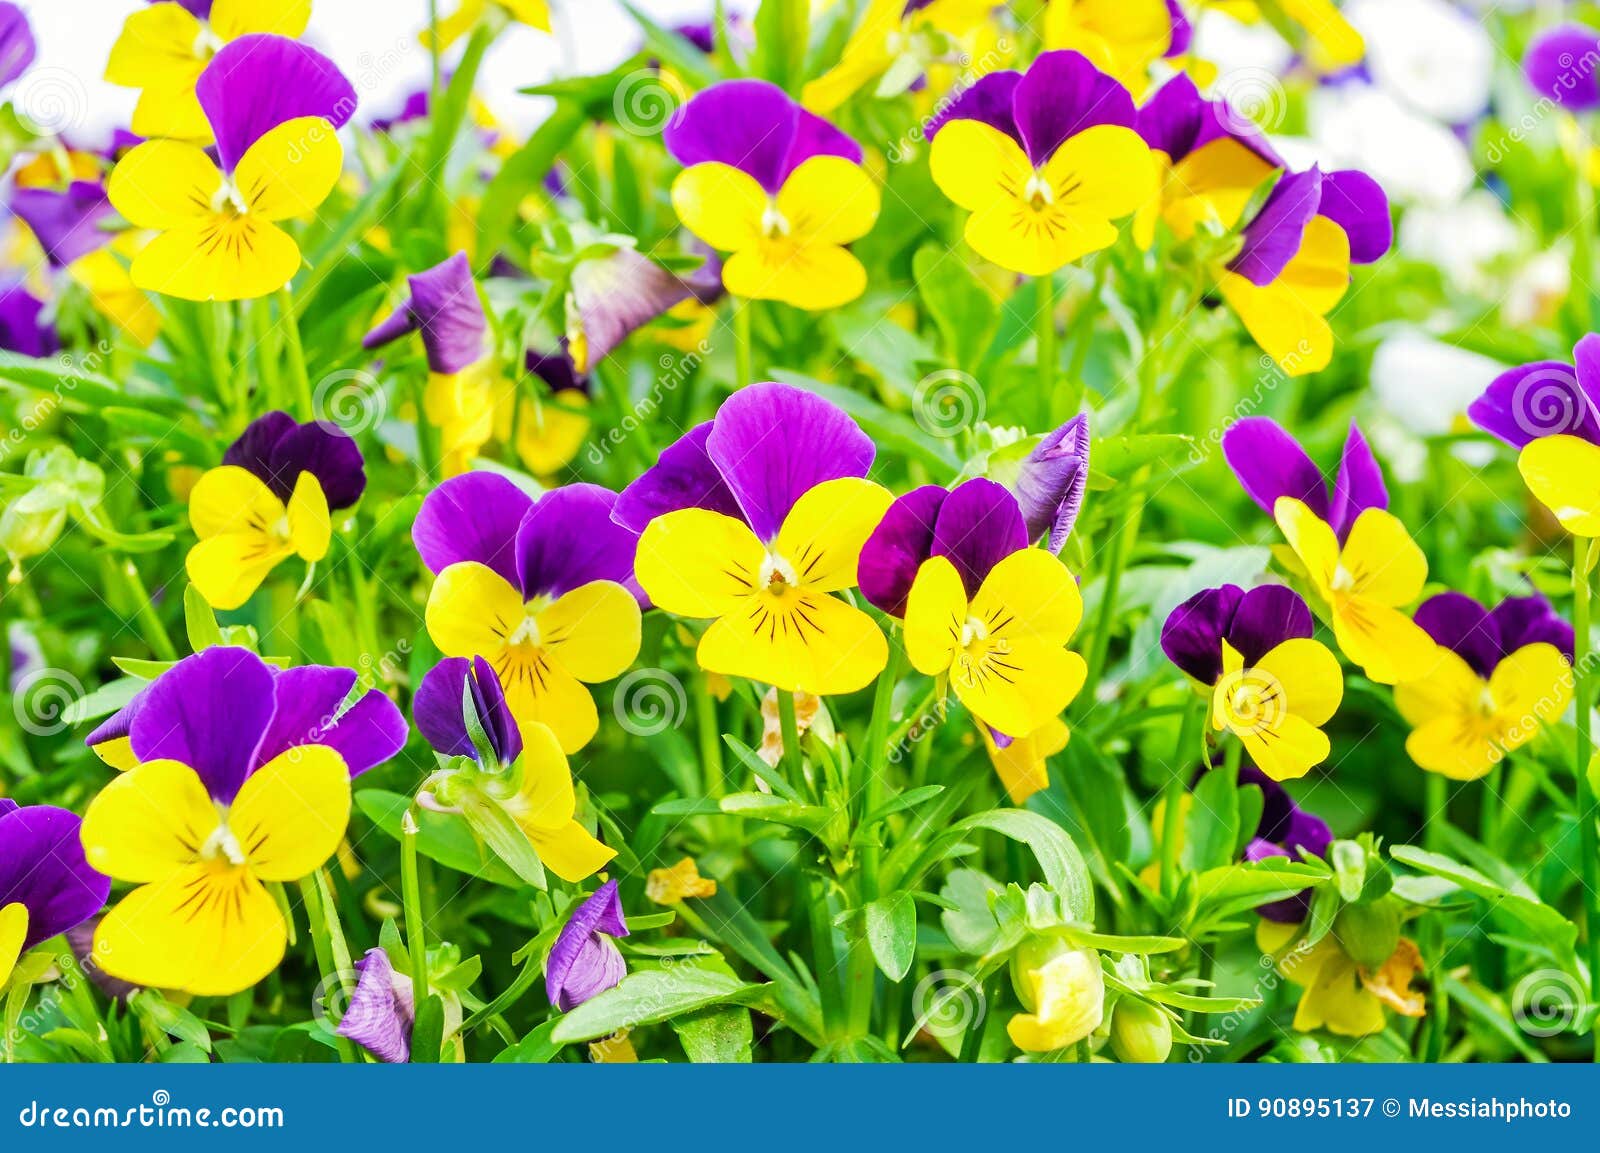 summer-flower-background-field-pink-yellow-blue-summer-pansies-nature-lilac-landscape-blooming-flowers-90895137.jpg